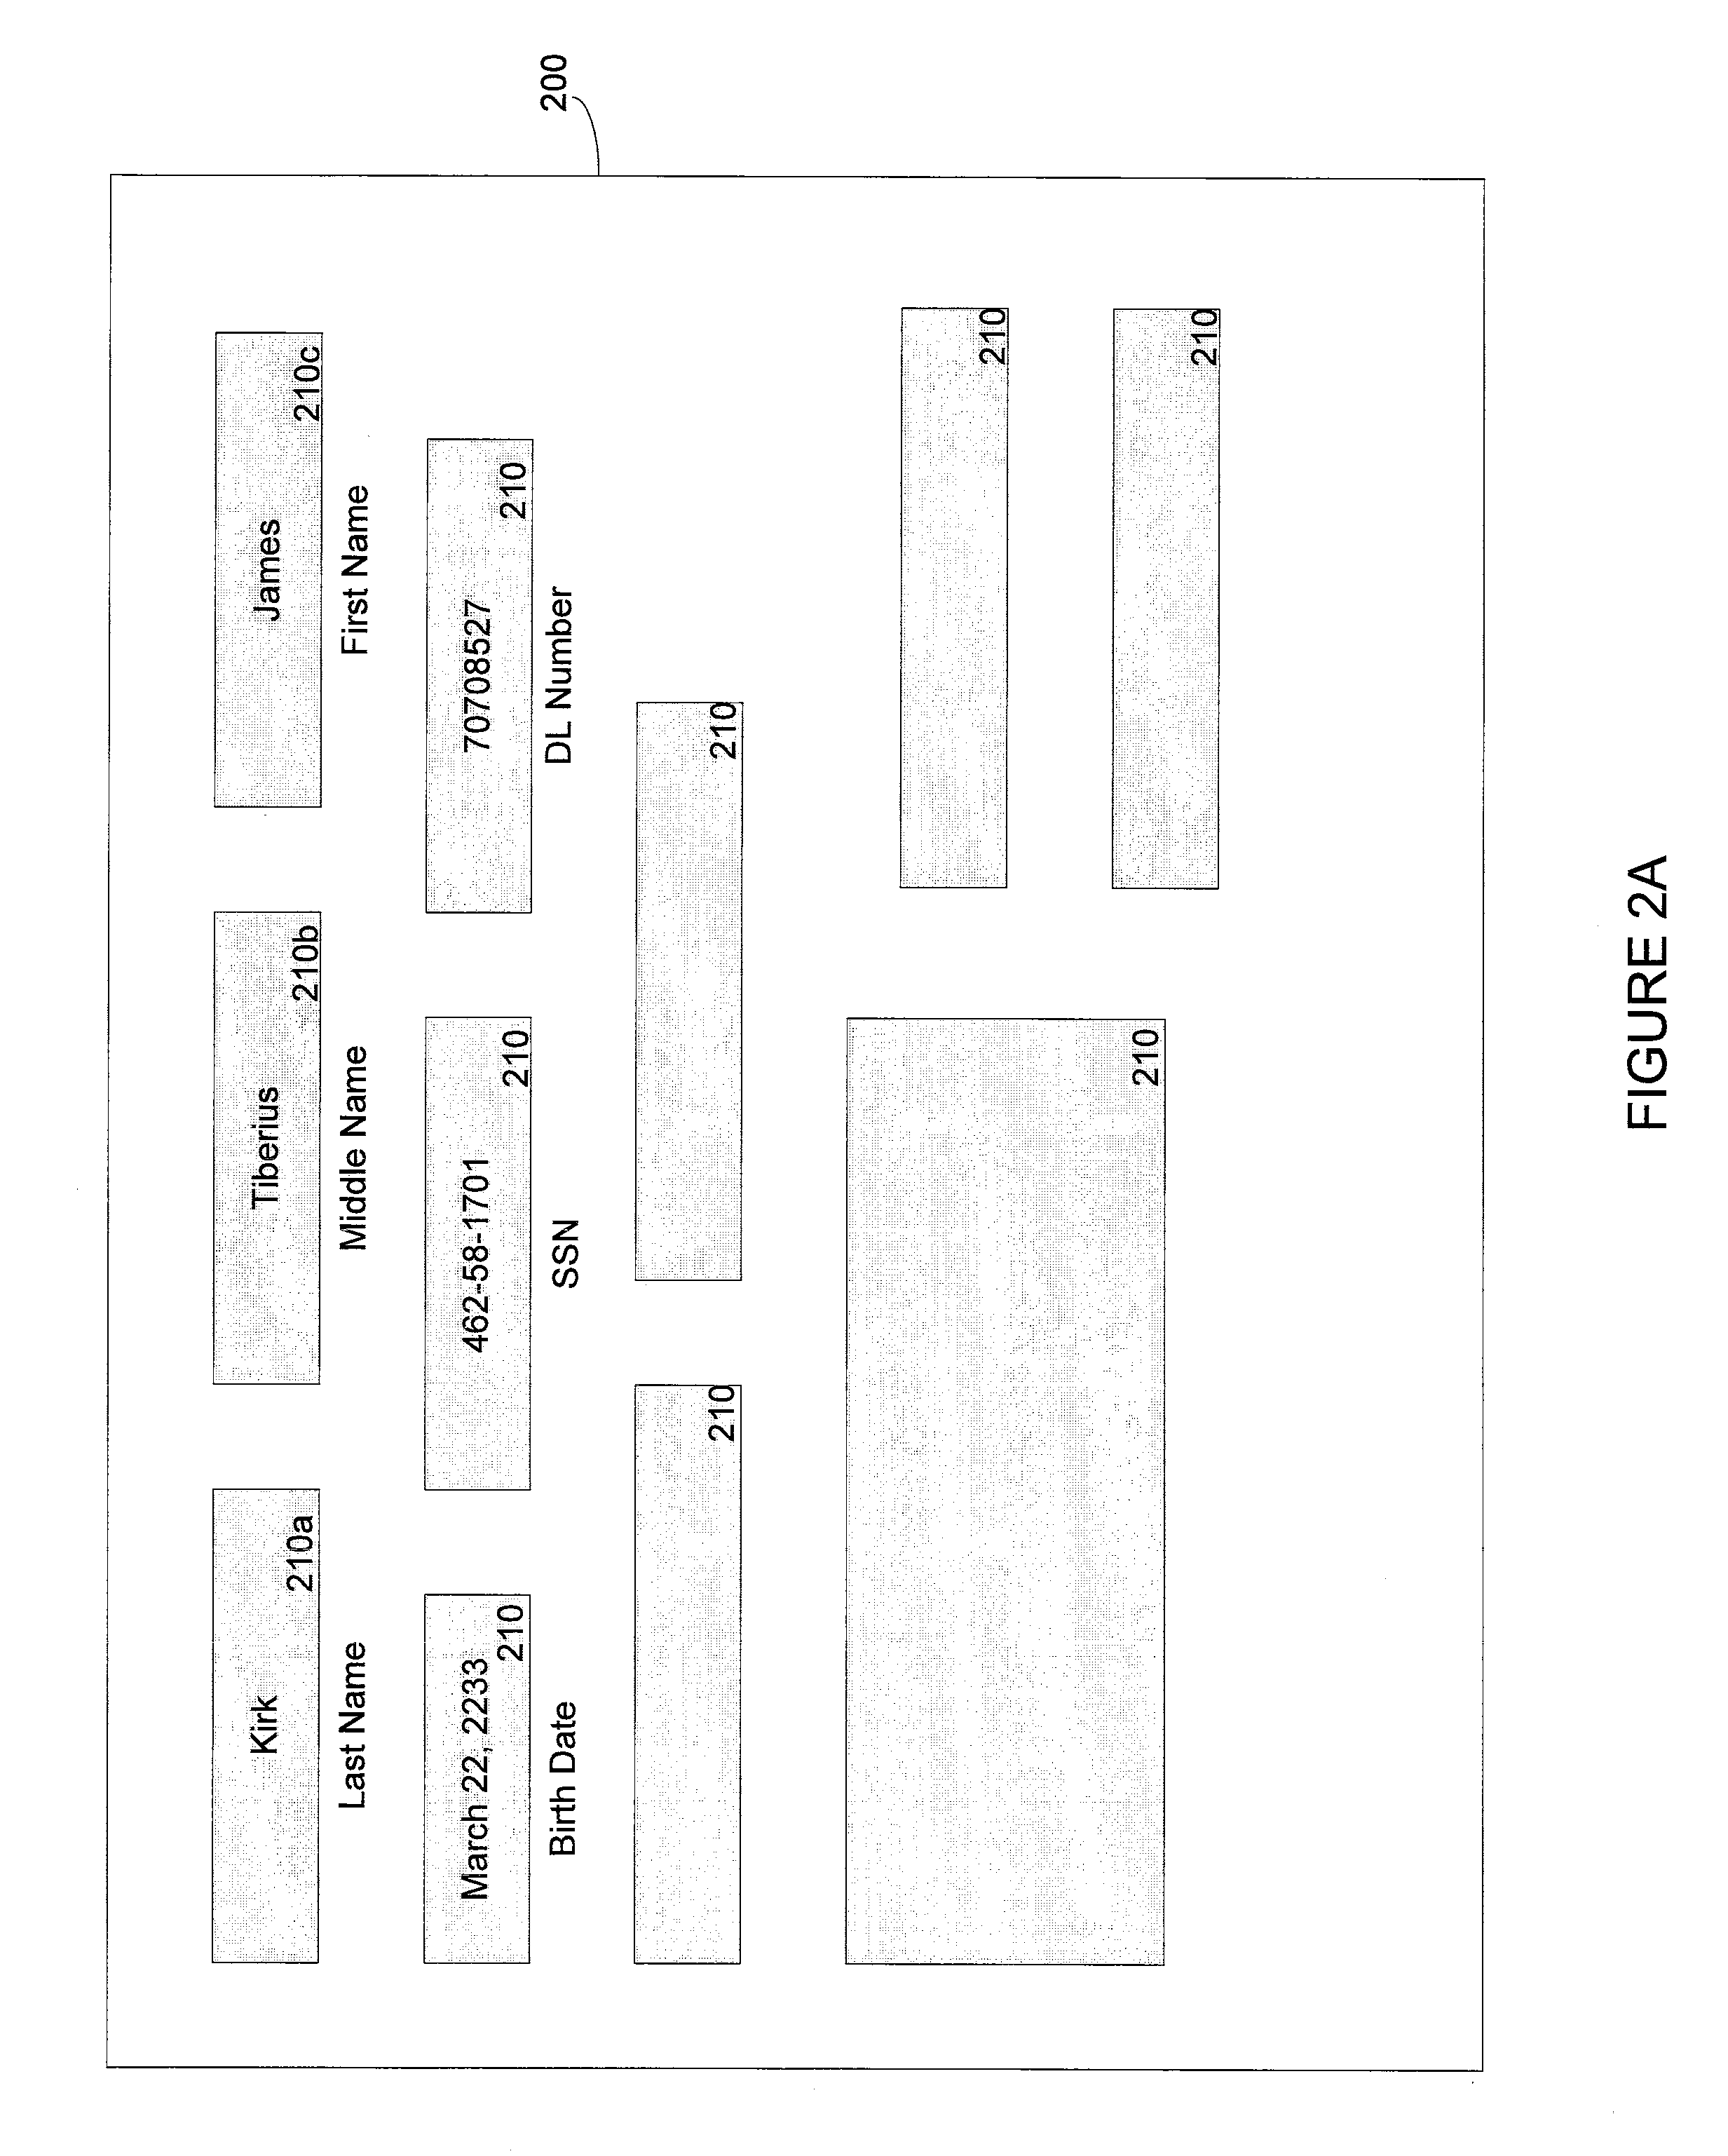 Method and System for Filtering False Positives